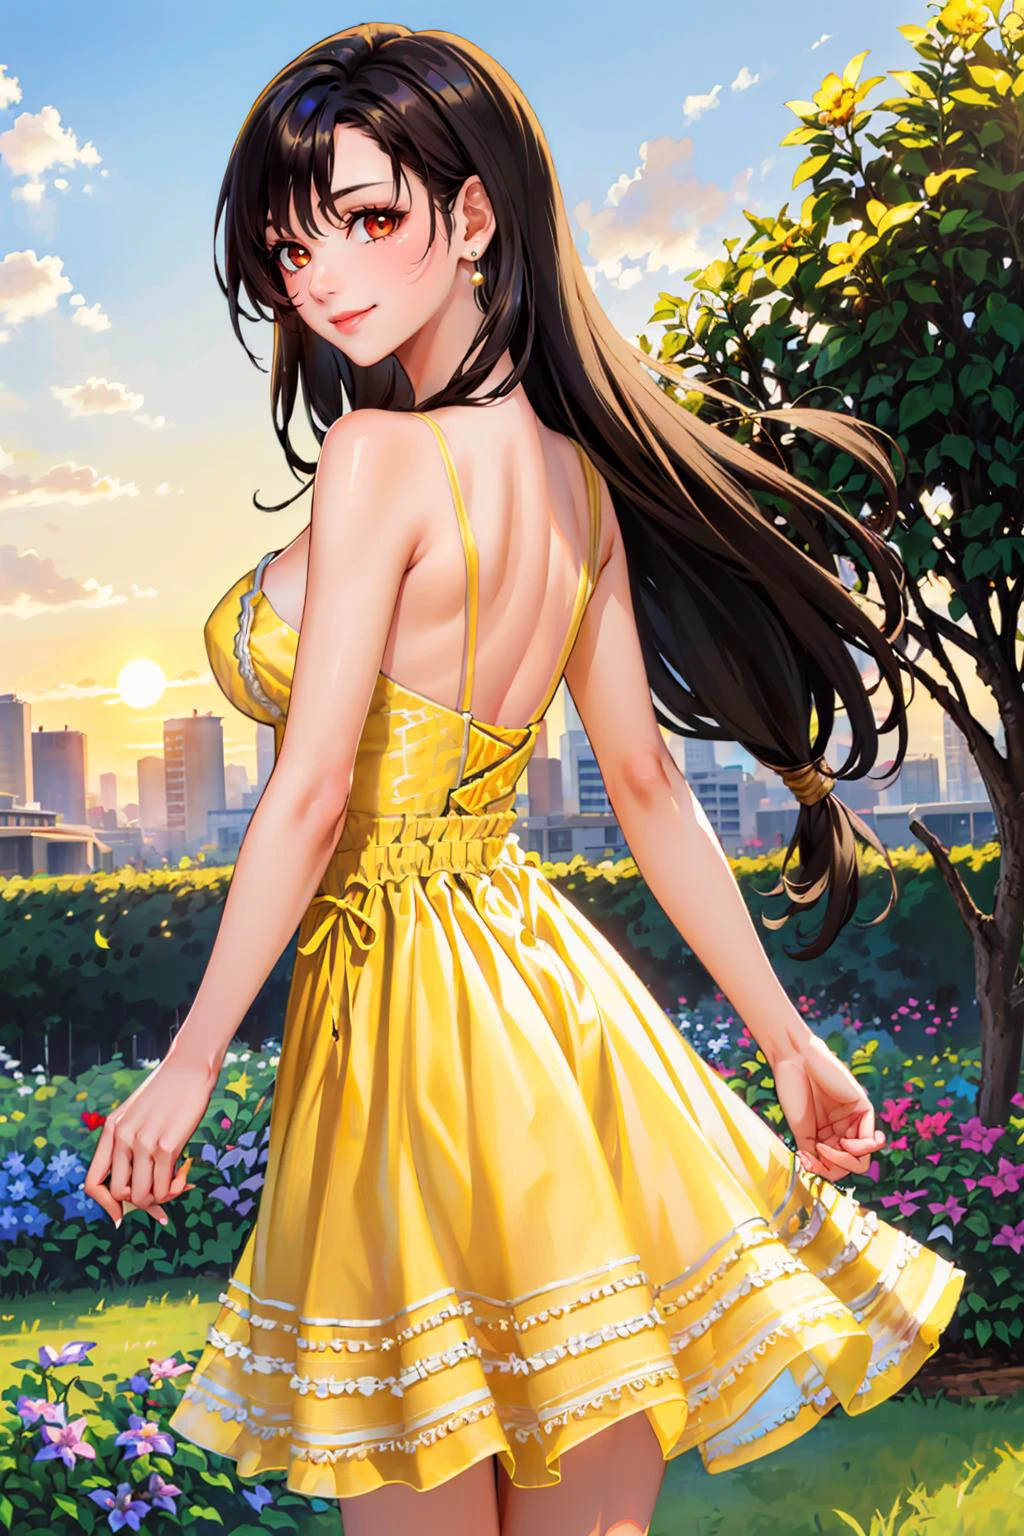 masterpiece, best quality, defTifa, red eyes, low-tied long hair, earrings, (yellow sundress:1.4), from behind, garden, sunset, smile, large breasts, cityscape edgYSD,woman wearing a yellow sundress